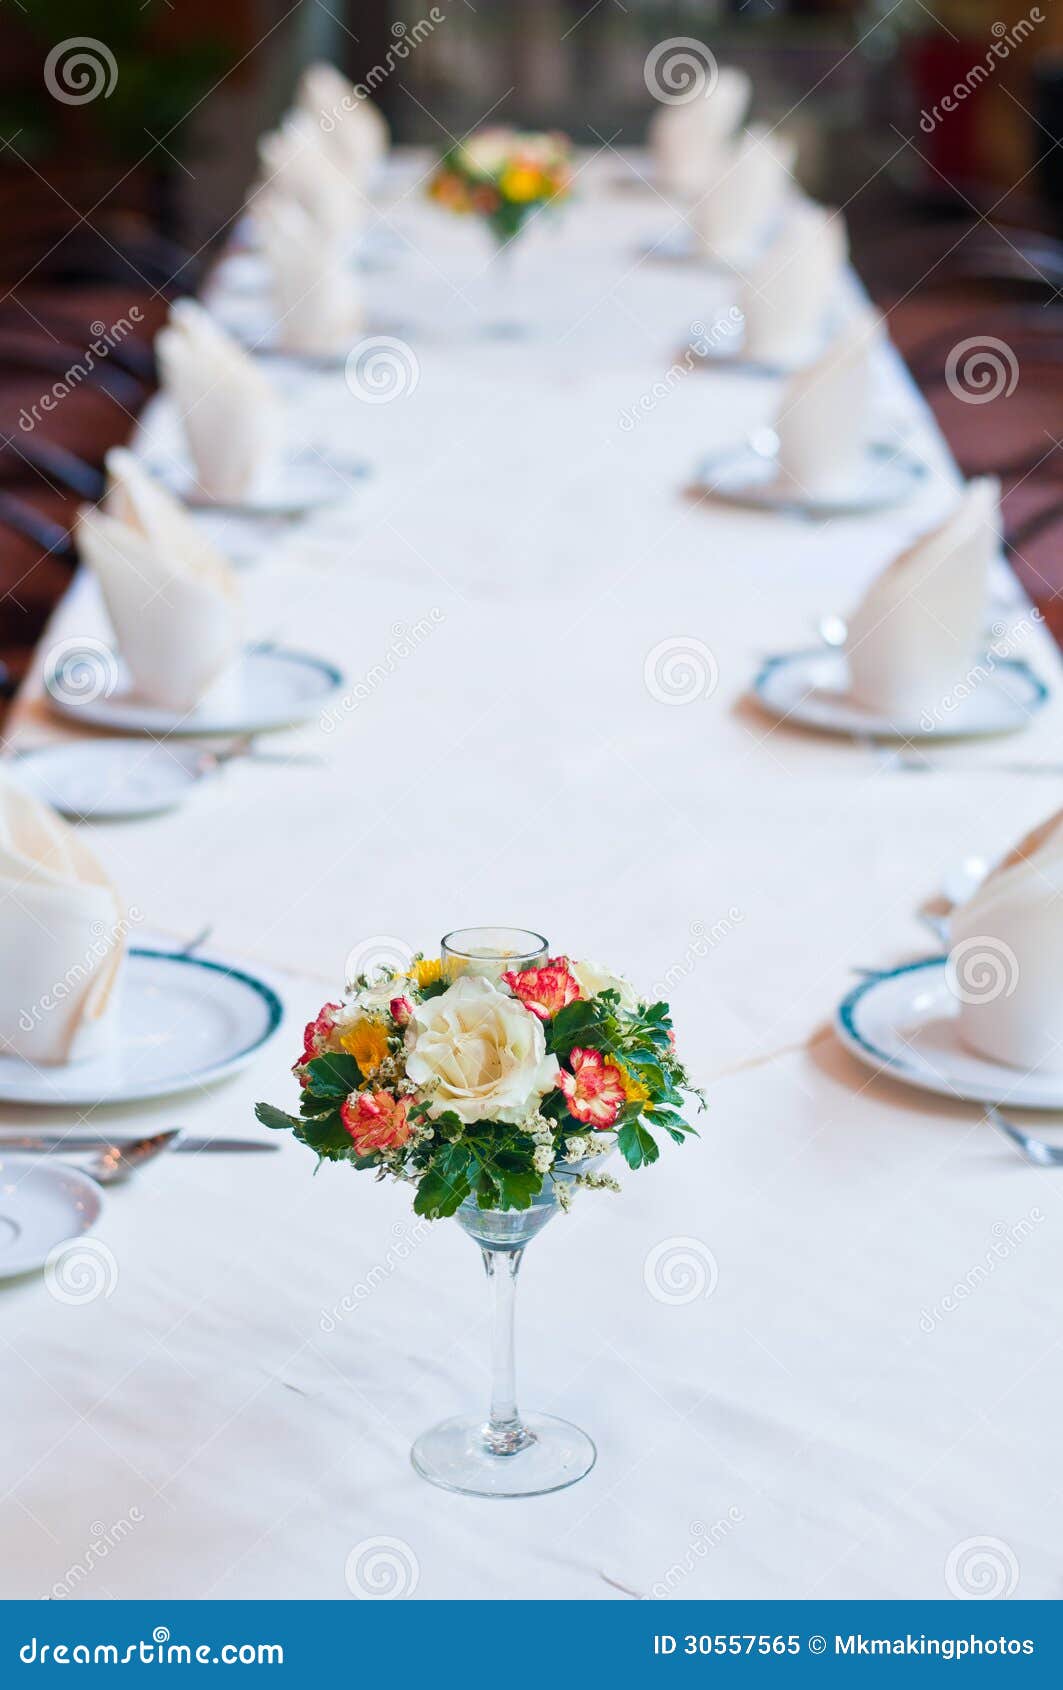 Set of table with flowers stock image. Image of color - 30557565